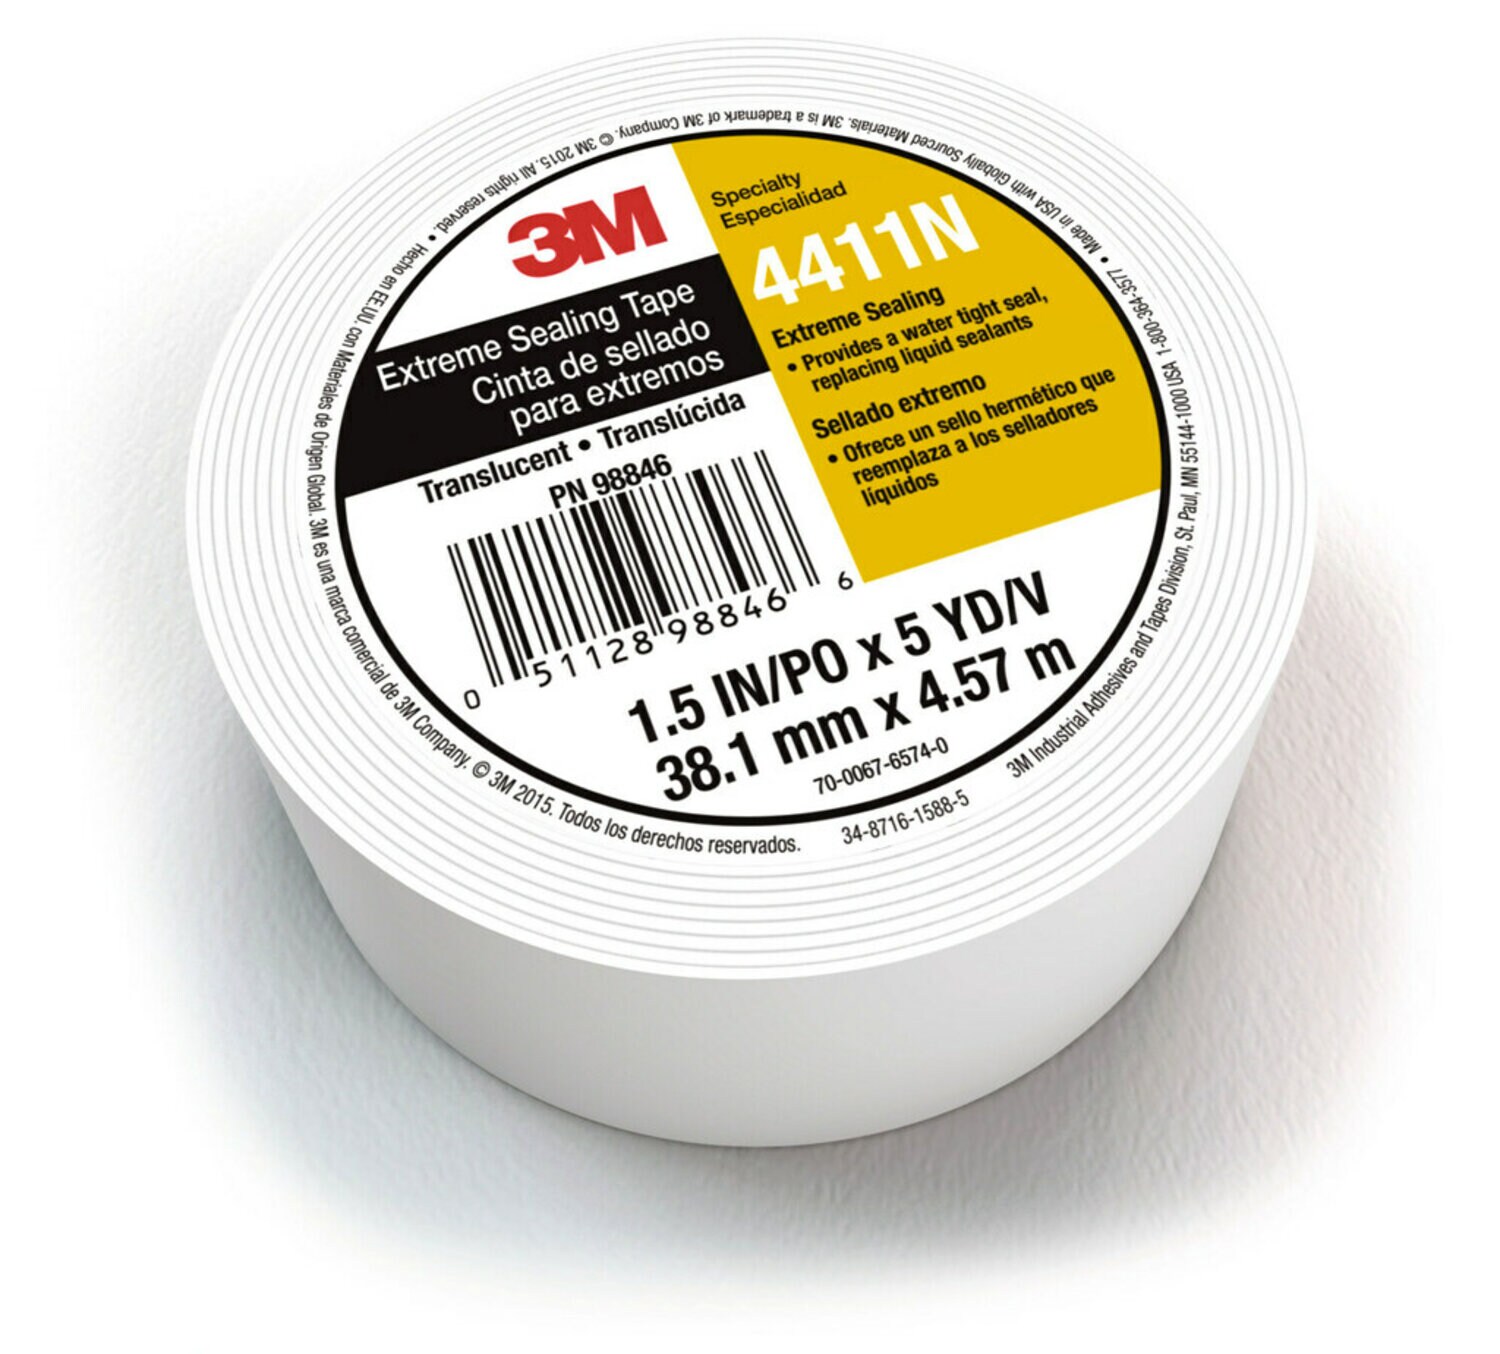 7100013034 - 3M Extreme Sealing Tape 4411N, Translucent, 40 mil, Roll, Config